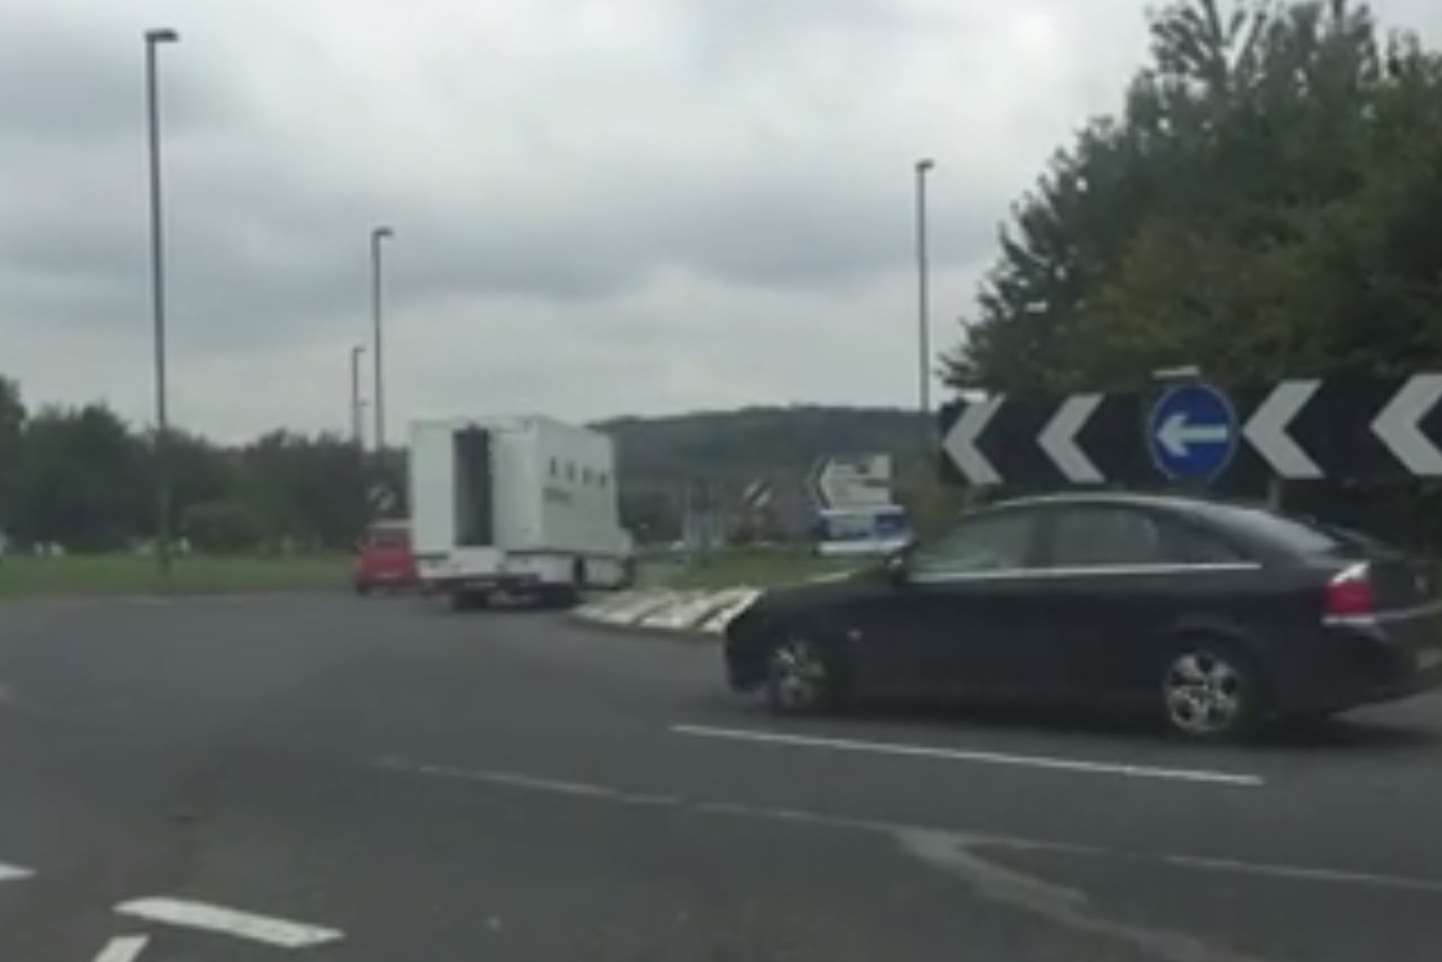 The door flaps open as the prison van is driven around the roundabout